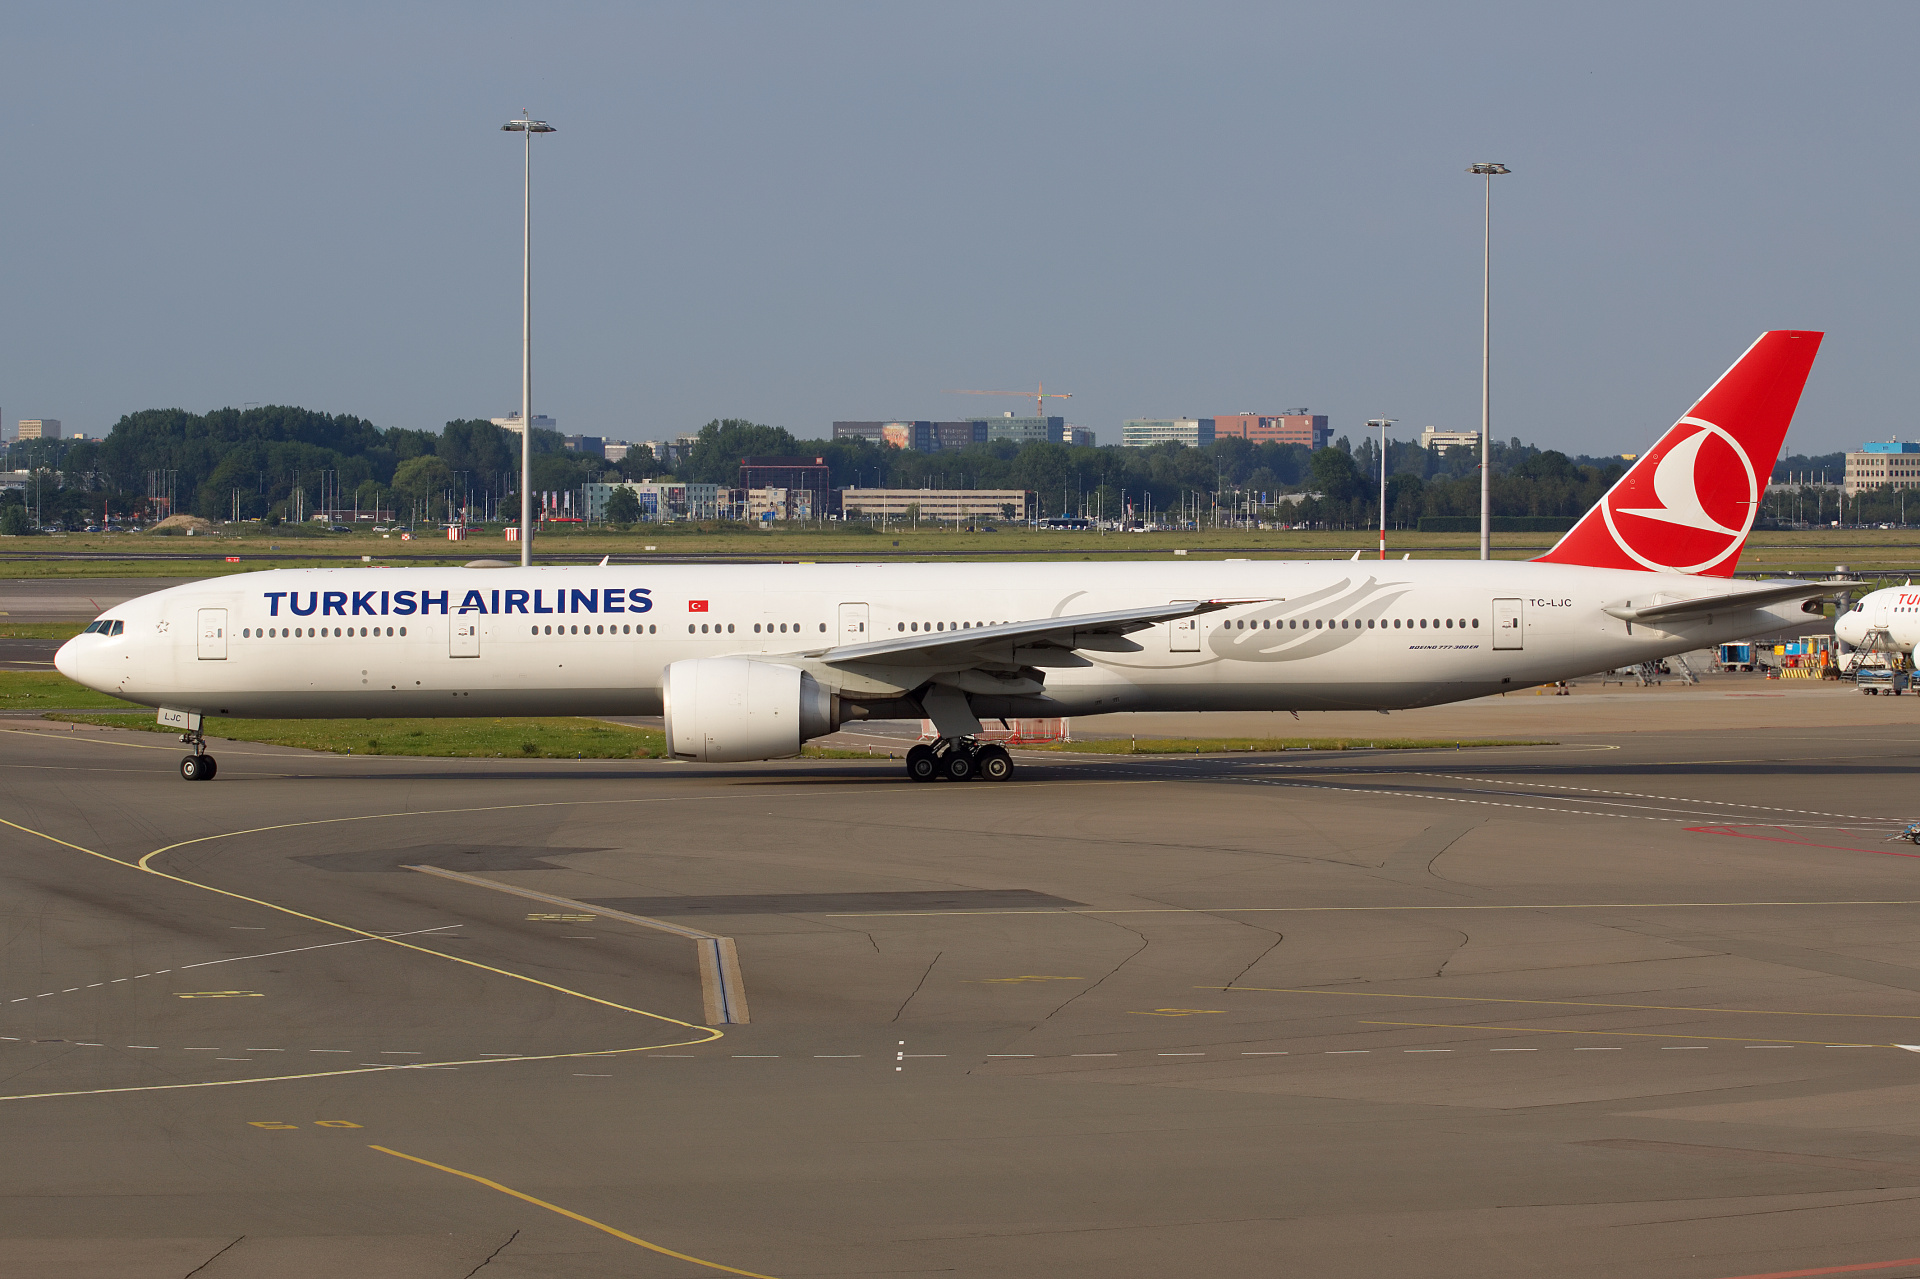 TC-LJC, THY Turkish Airlines (Aircraft » Schiphol Spotting » Boeing 777-300ER)